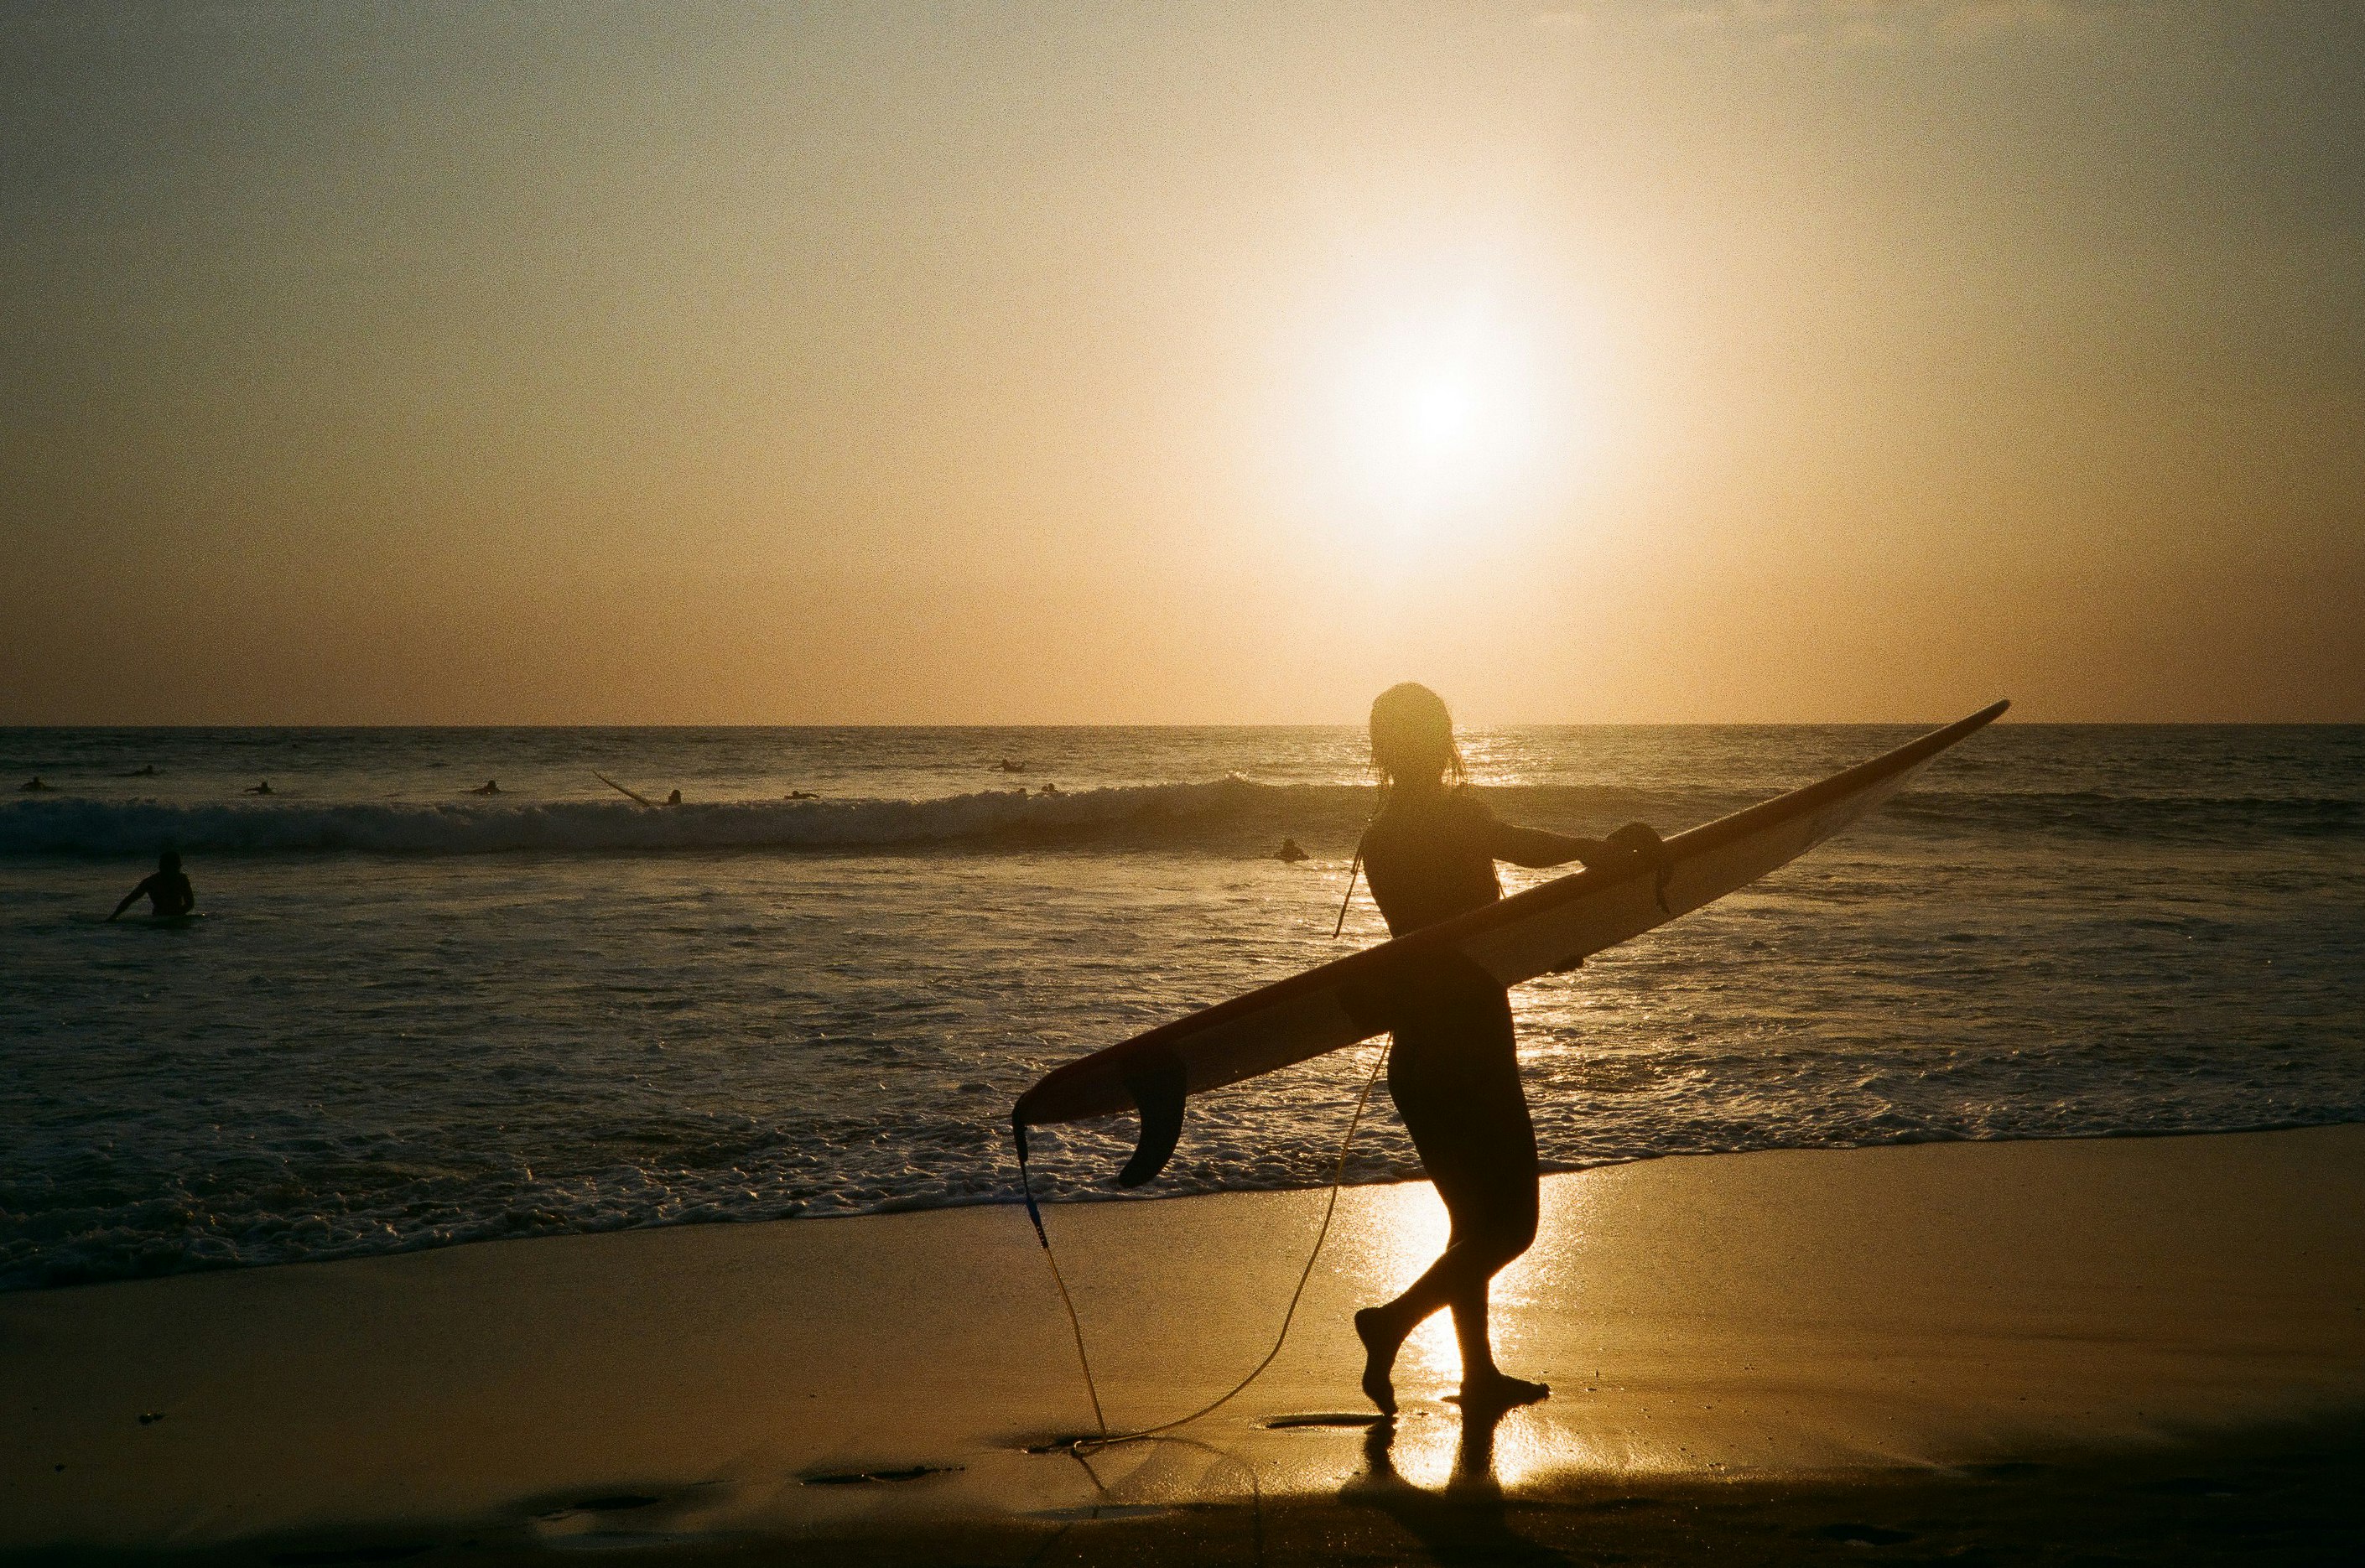 silhouette of man holding surfboard on beach during sunset